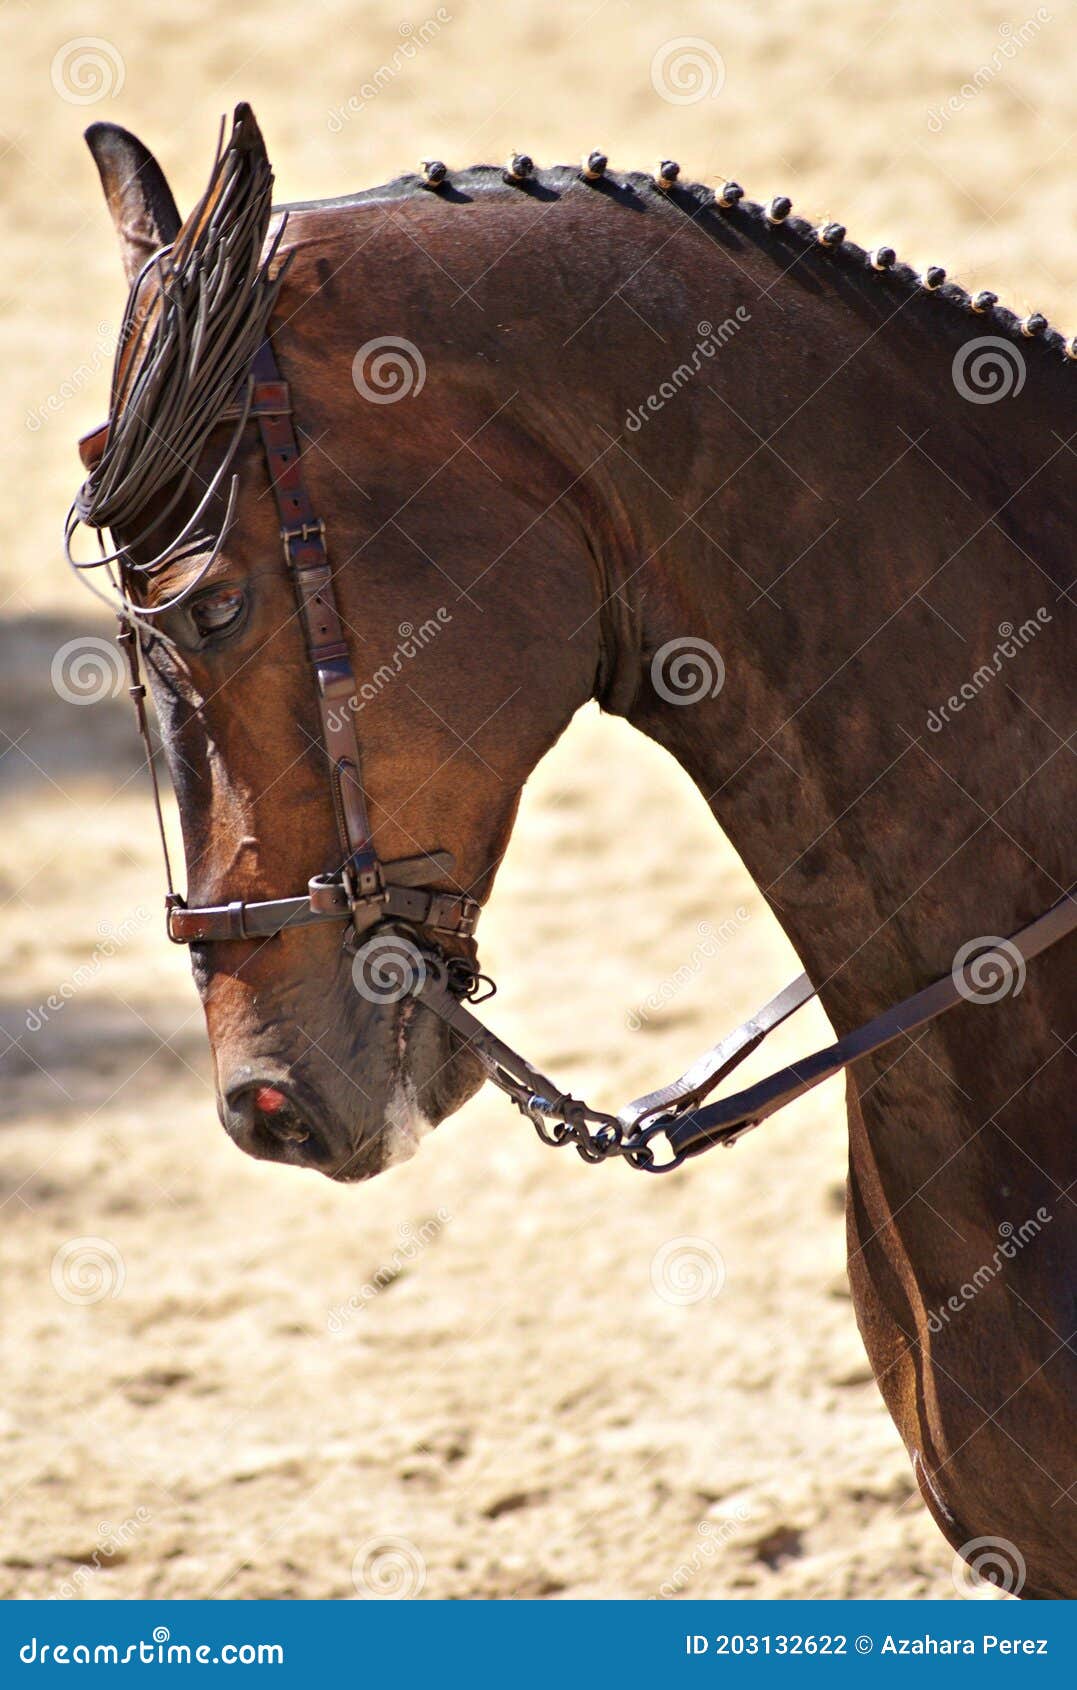 face portrait of a brown crossbred horse in doma vaquera in spain